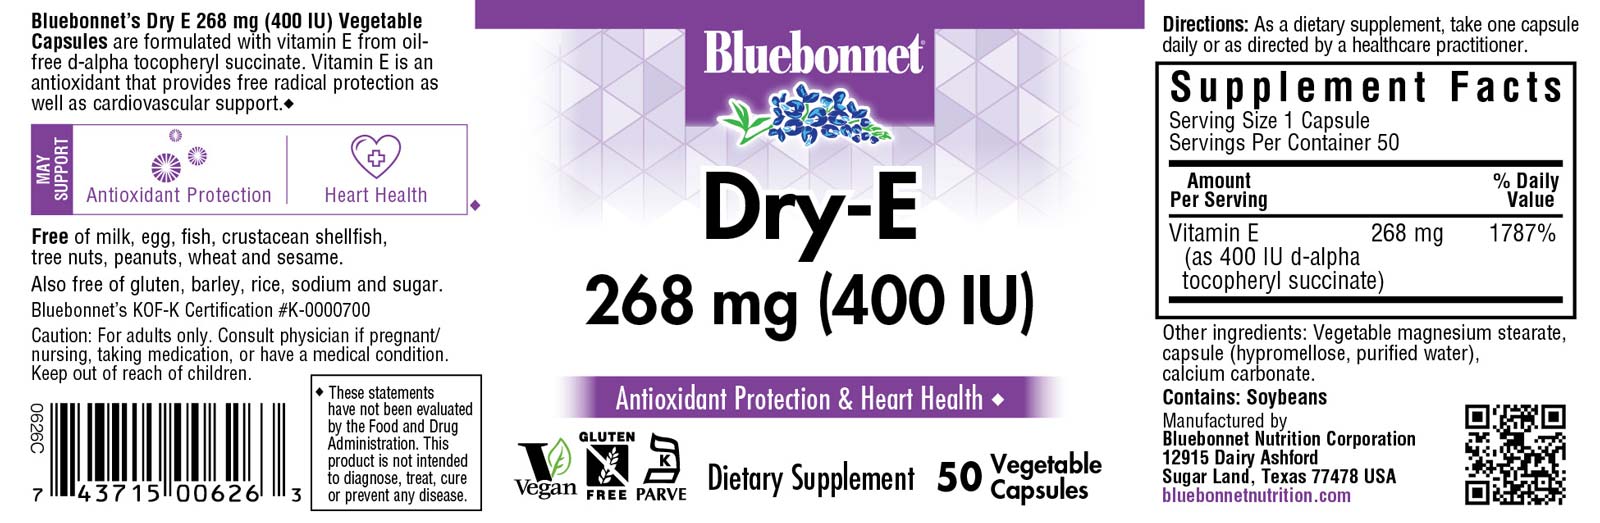 Bluebonnet’s Dry E-268 mg (400 lU) d-Alpha Tocopheryl 50 Vegetable Capsules are formulated with vitamin E from oil-free d-alpha tocopheryl succinate. Vitamin E is an antioxidant that provides free radical protection as well as cardiovascular support.#size_50 count